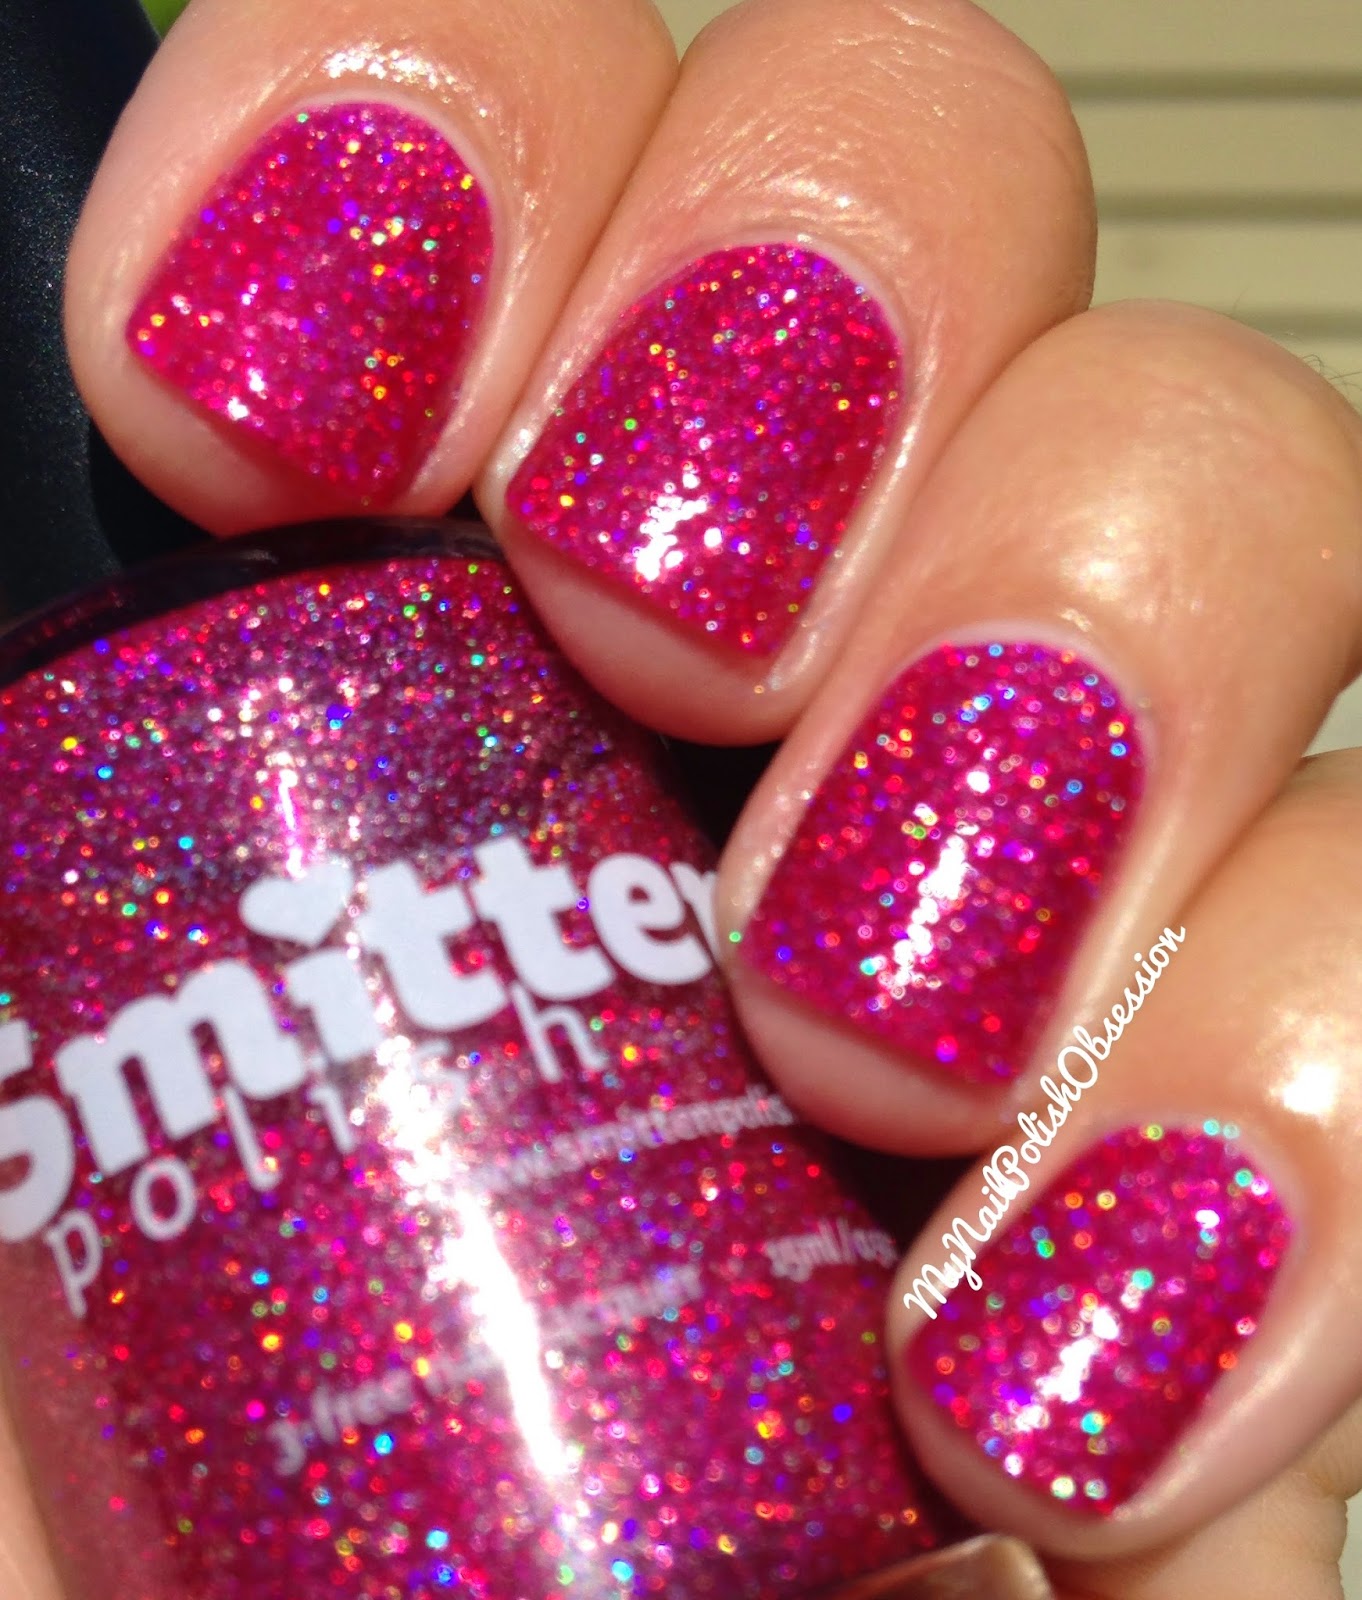 My Nail Polish Obsession: Smitten Polish Summer 2014 Collection